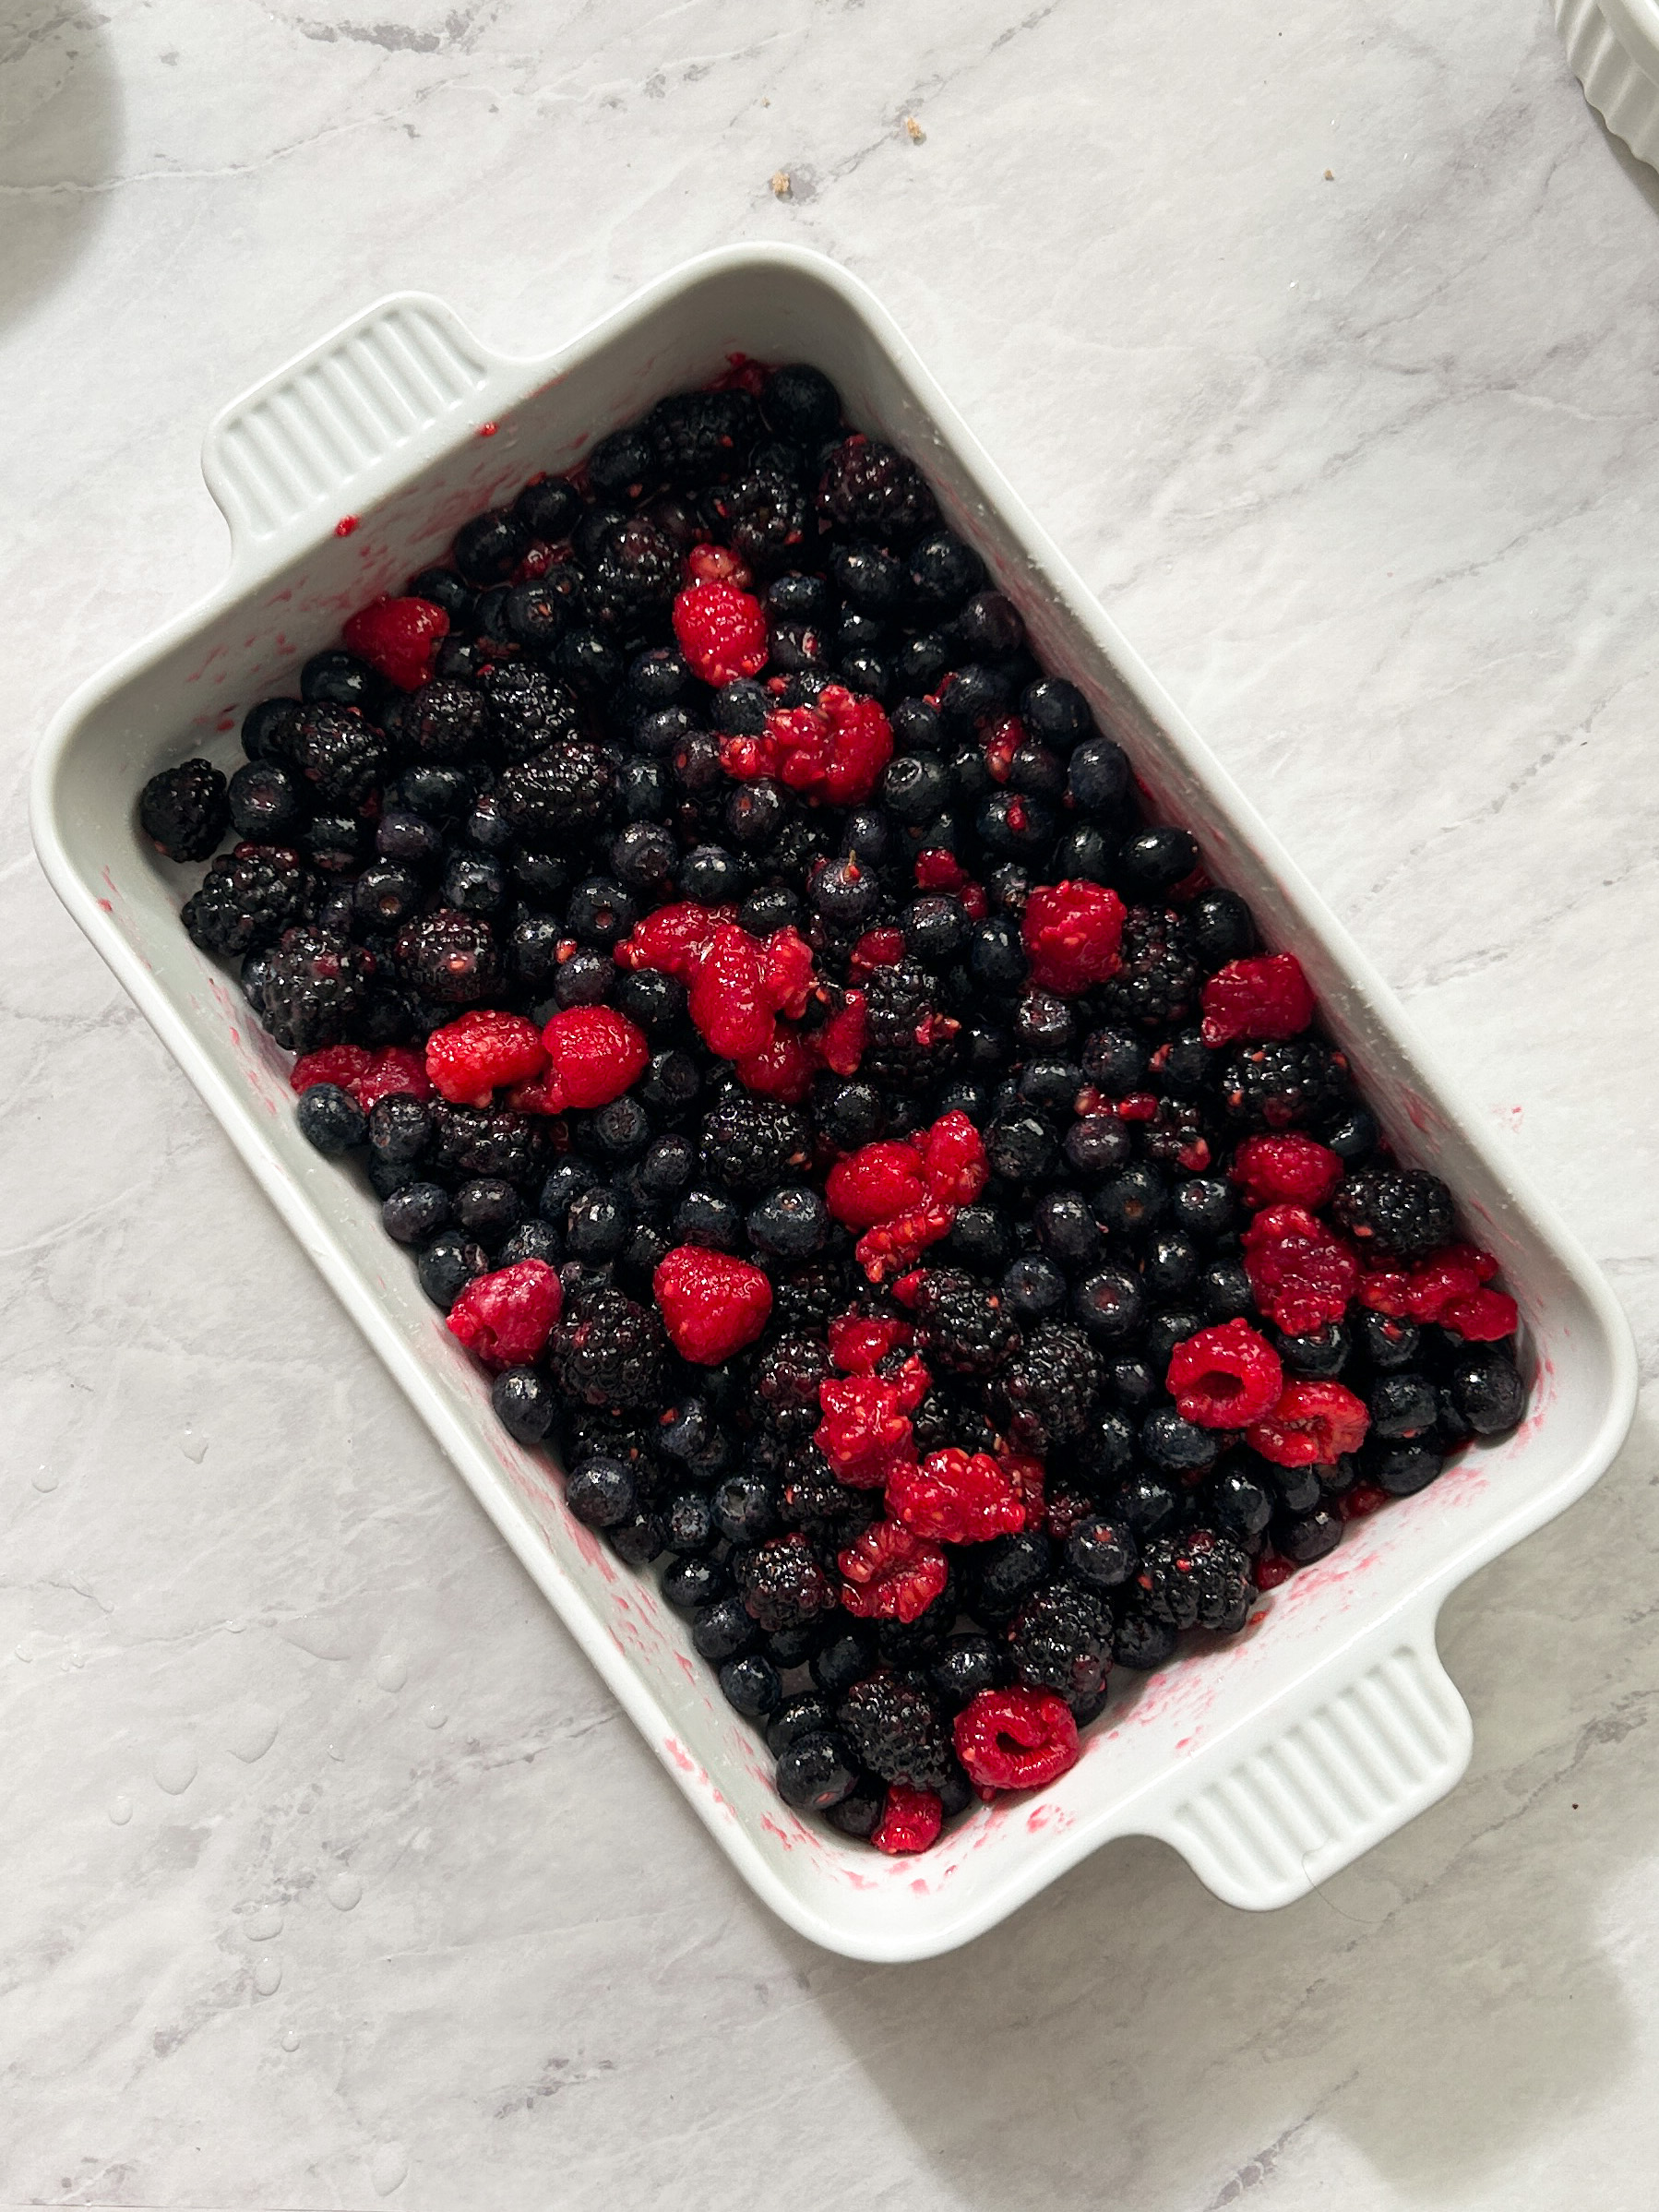 freshly washed raspberries blueberries and blackberries in a casserole dish